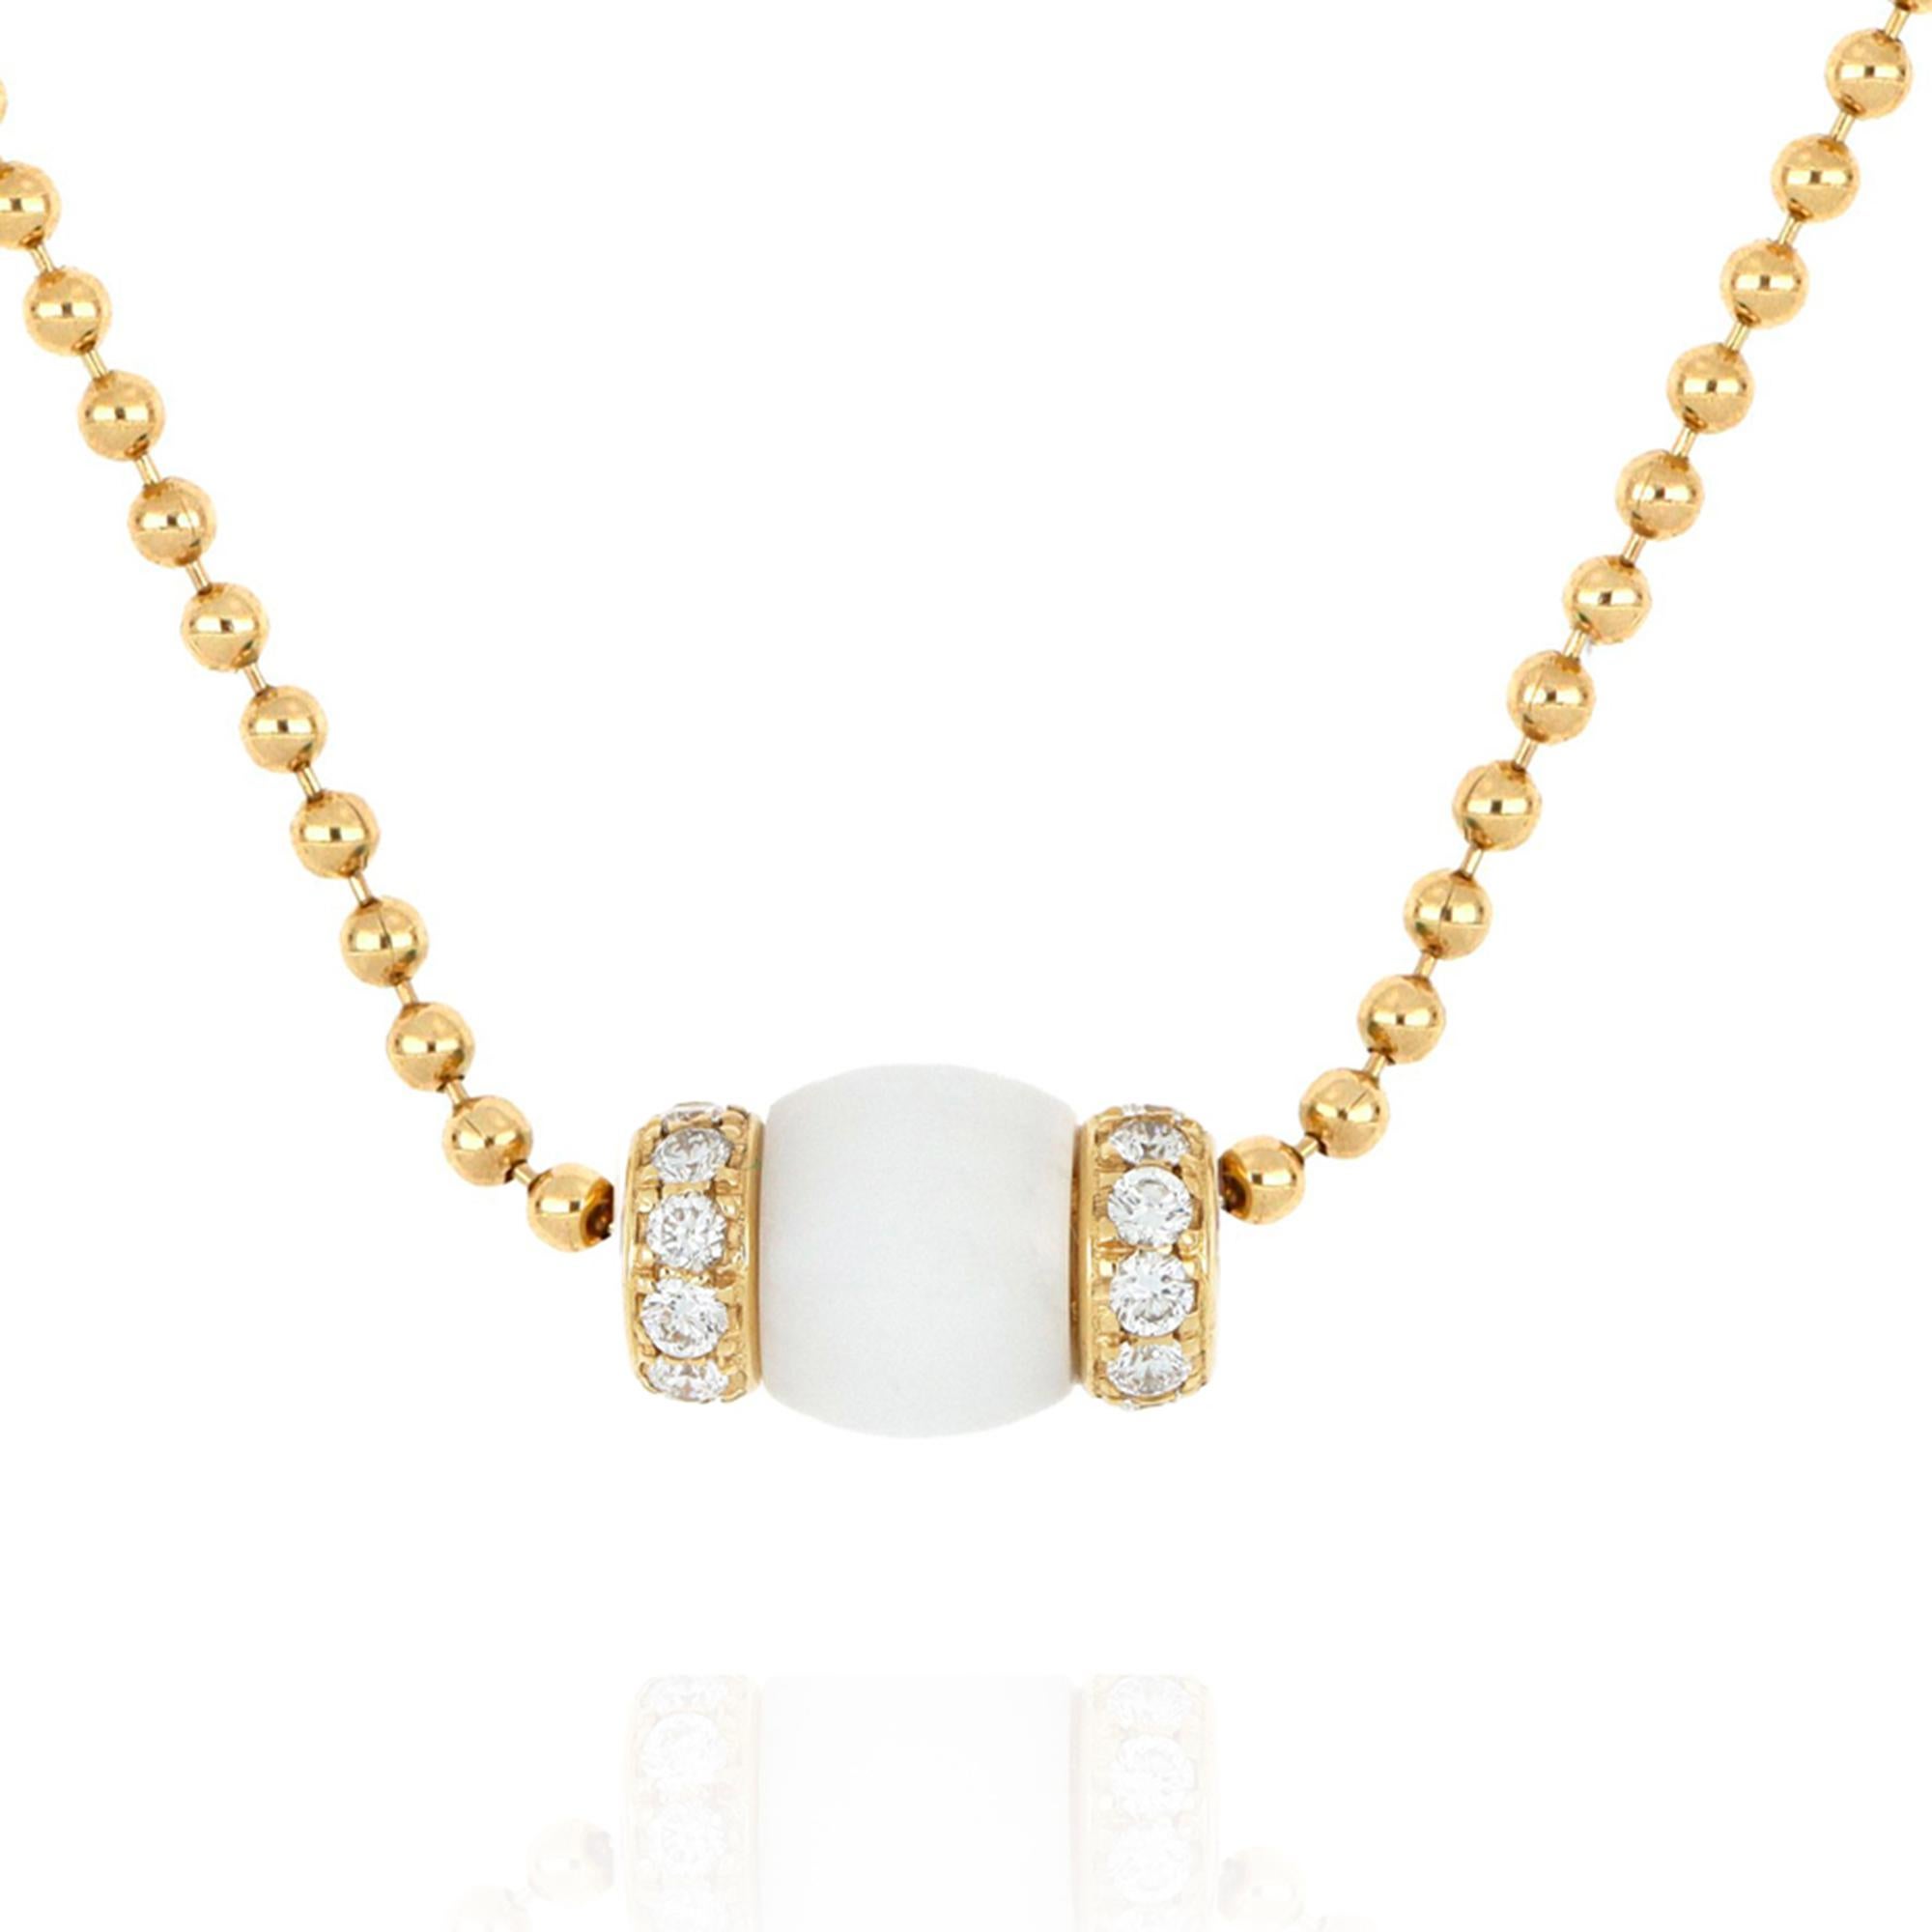 Avant-garde design, simple and linear volumes come together in this necklace from Le Carrousel collection. 18-kt yellow gold, combined with the pure white of howlite and the preciousness of diamonds, ennobles the three-dimensionality of the